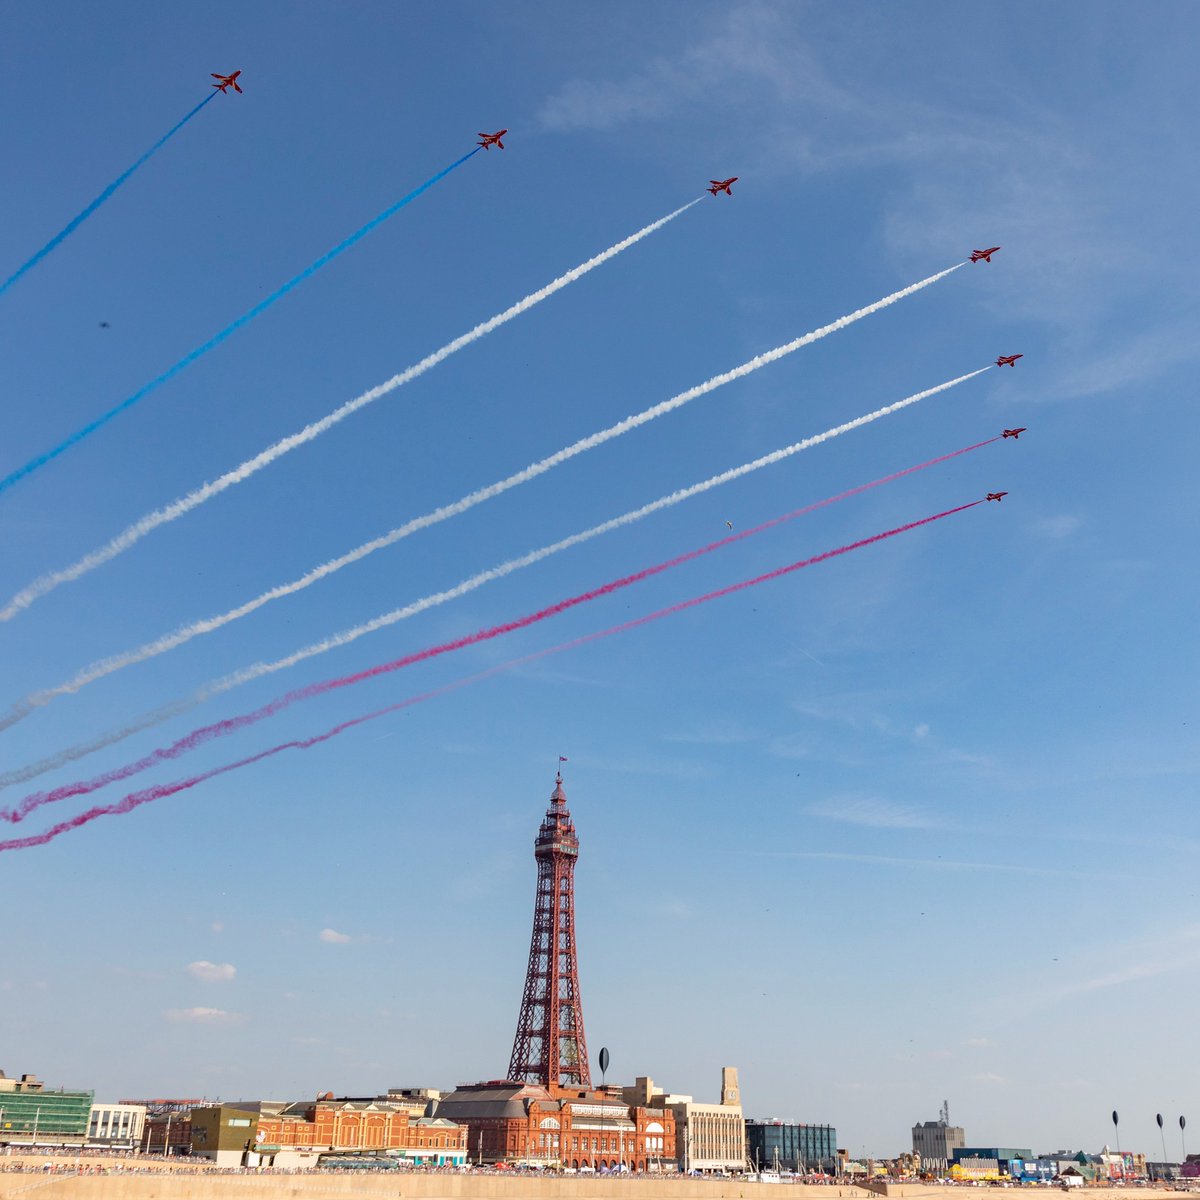 Blackpool Air Show is back this summer and the Red Arrows will be performing on both days of the free event! They will be joined by the RAF Typhoon and the Battle of Britain Memorial Flight. The full line-up will be announced soon. 📅 Saturday 10 August and Sunday 11 August